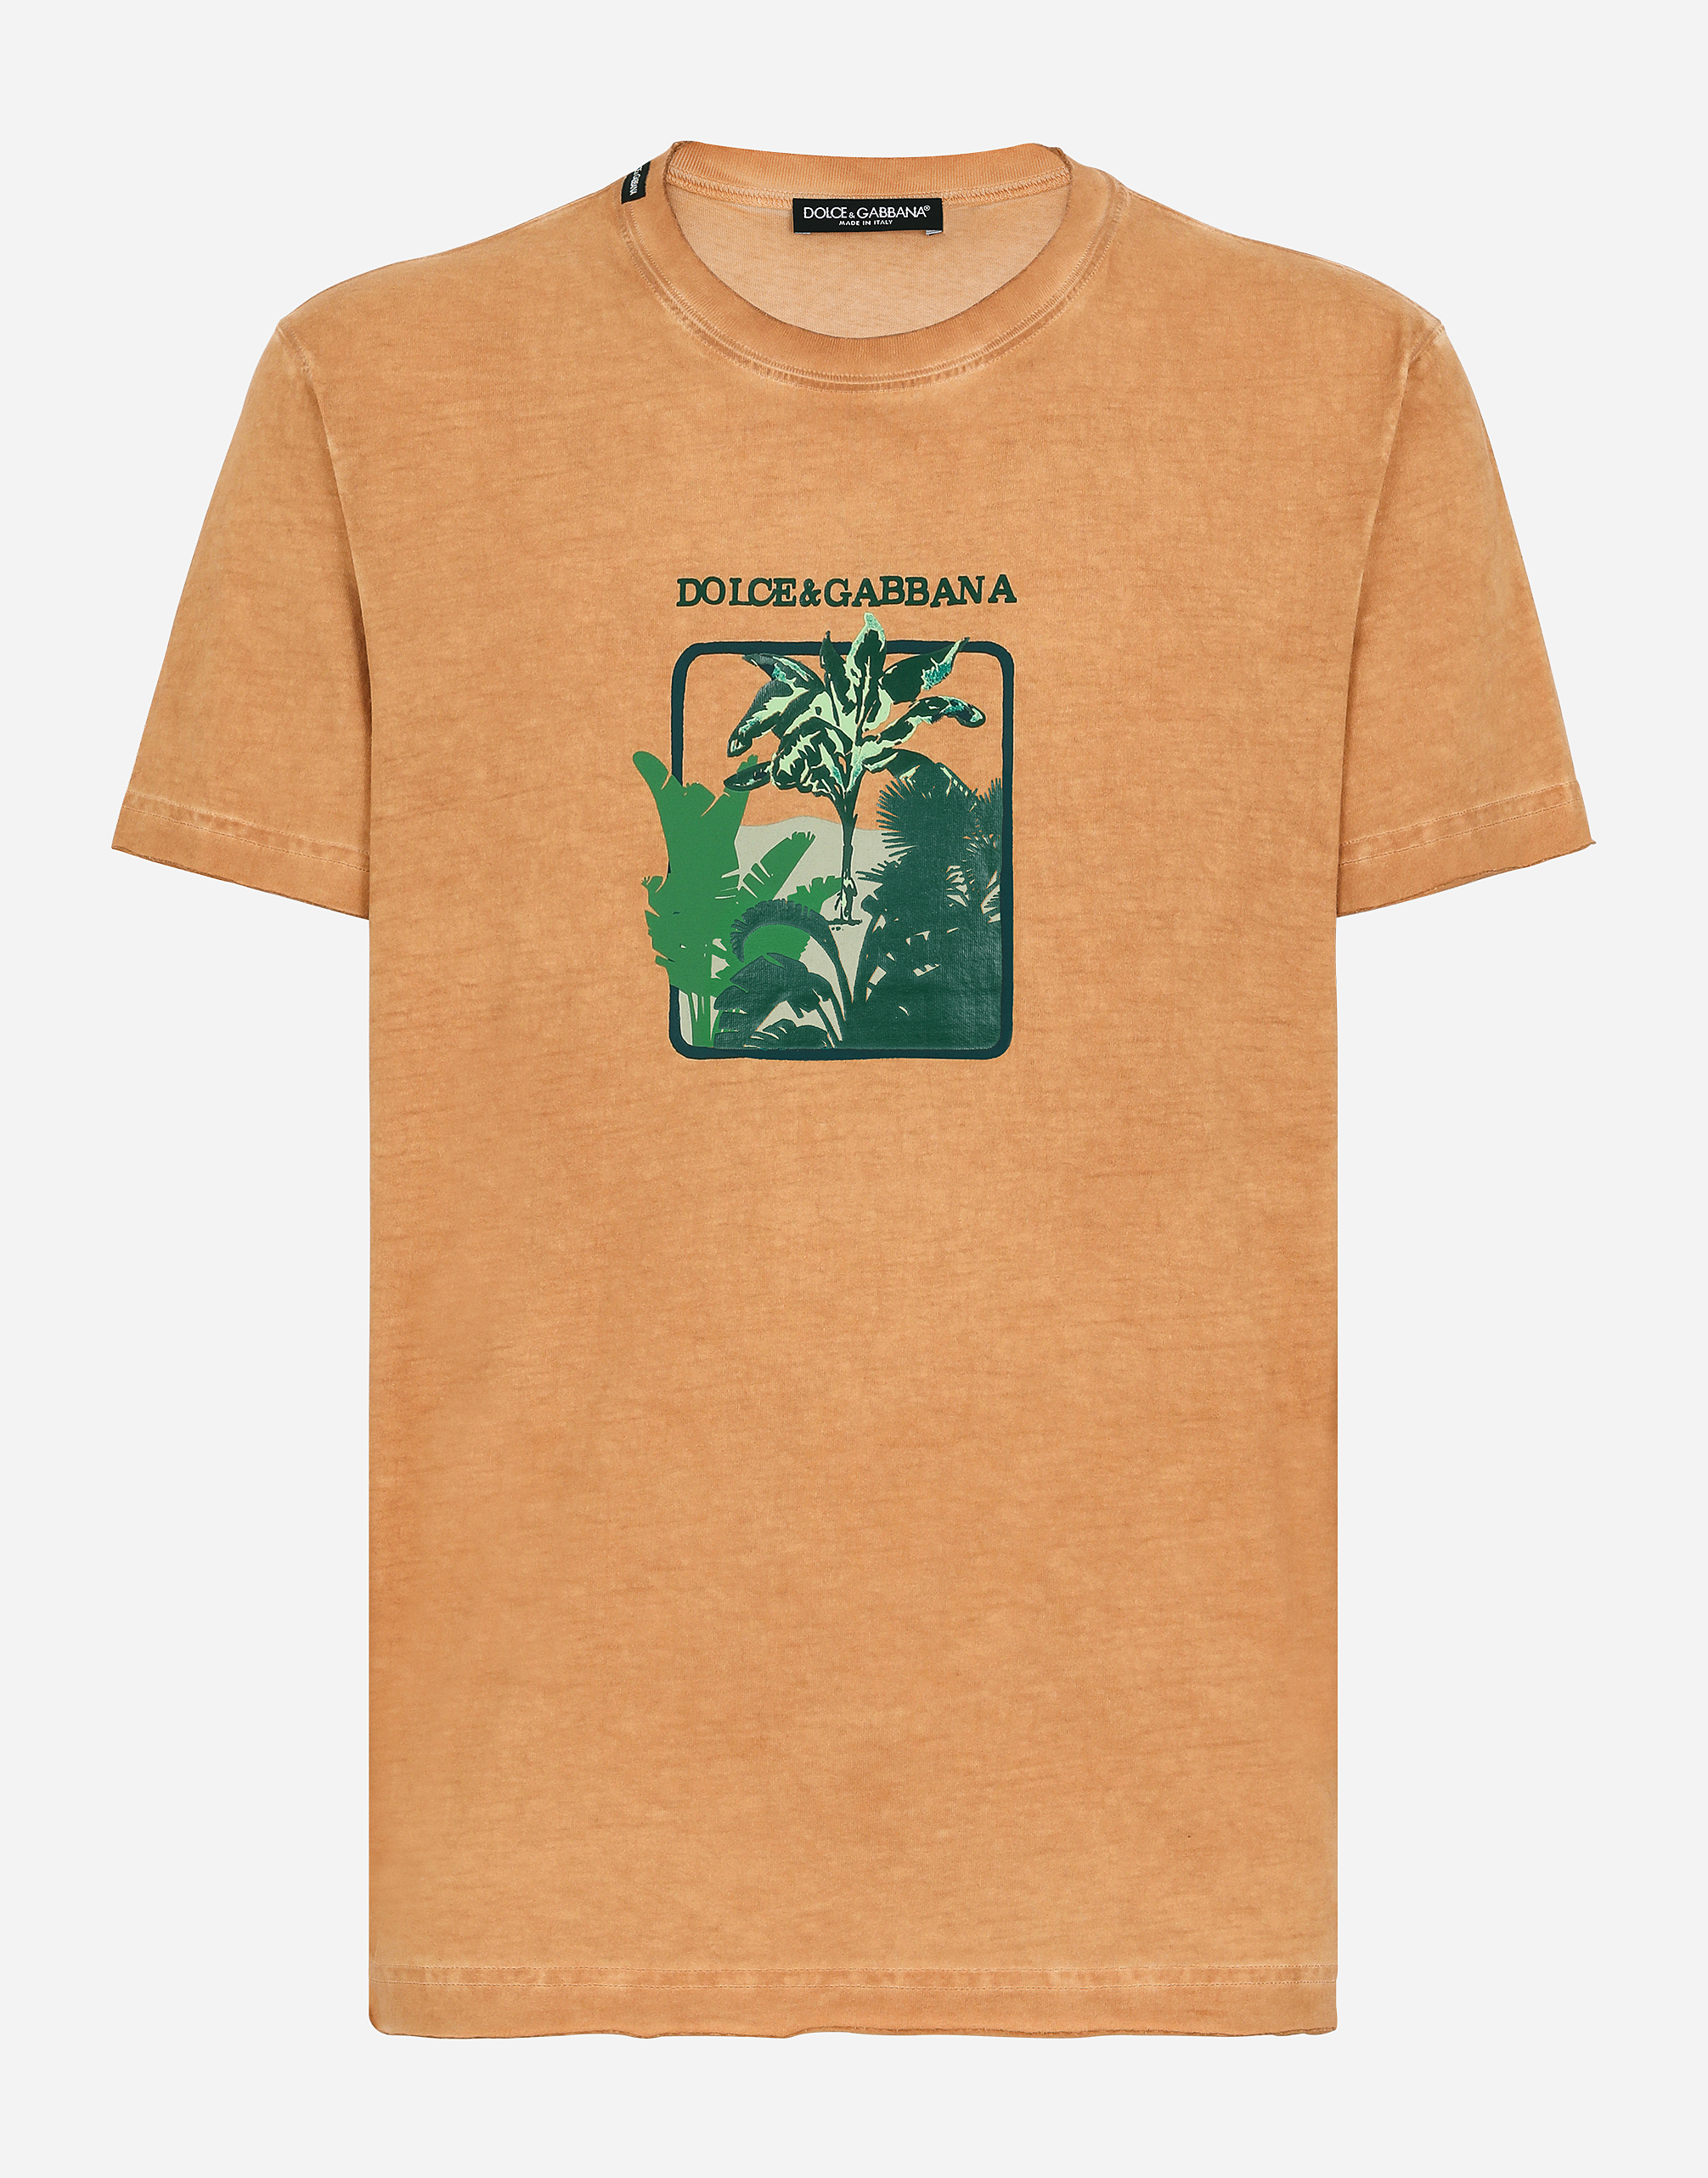 Dolce & Gabbana Short-sleeved Cotton T-shirt With Banana Tree Print In Brown